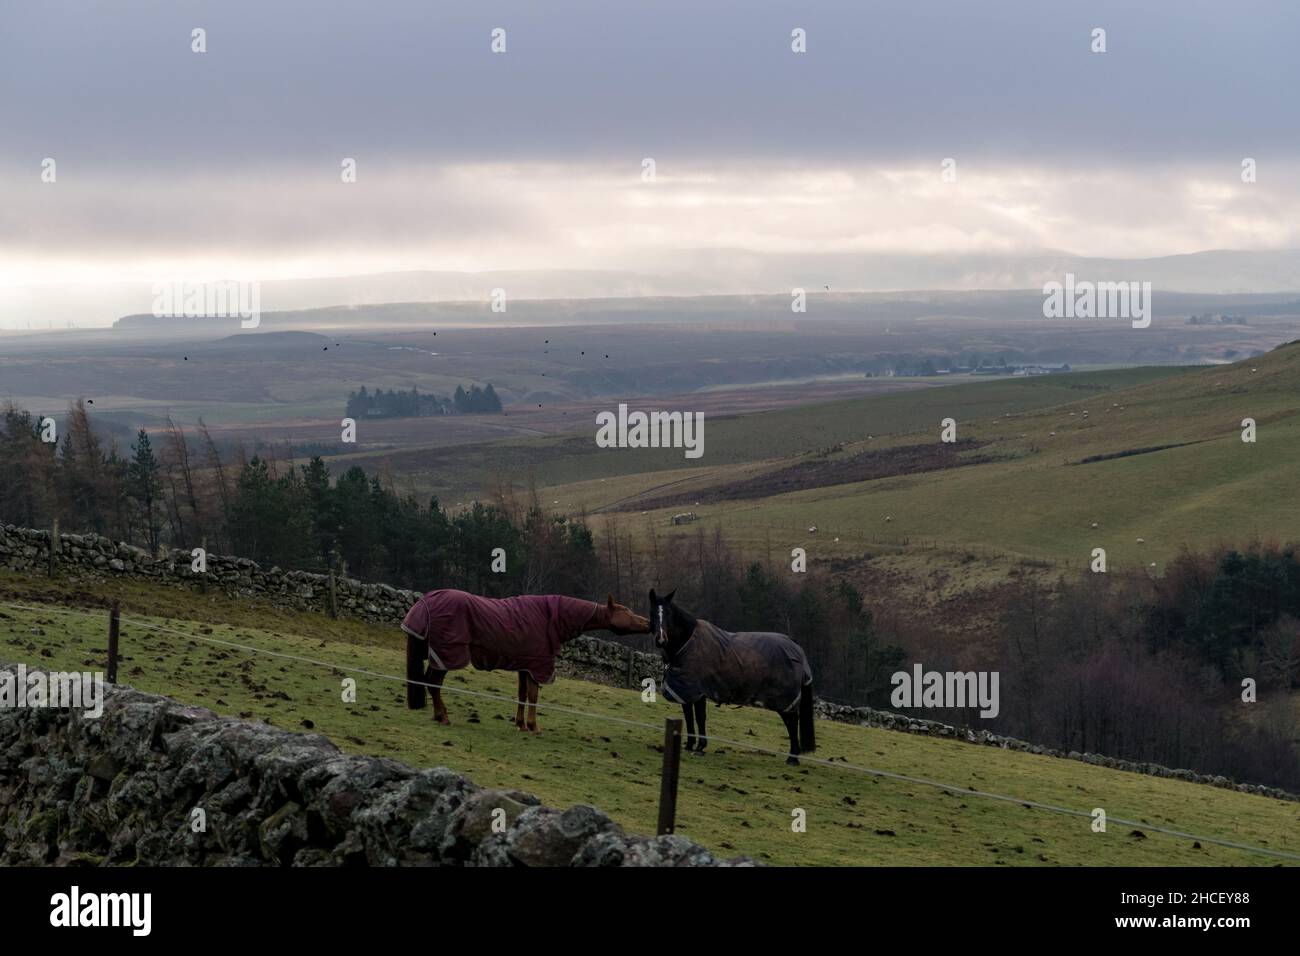 Two horses standing in a field on a winter day wearing a winter blanket to protect from the cold weather Stock Photo